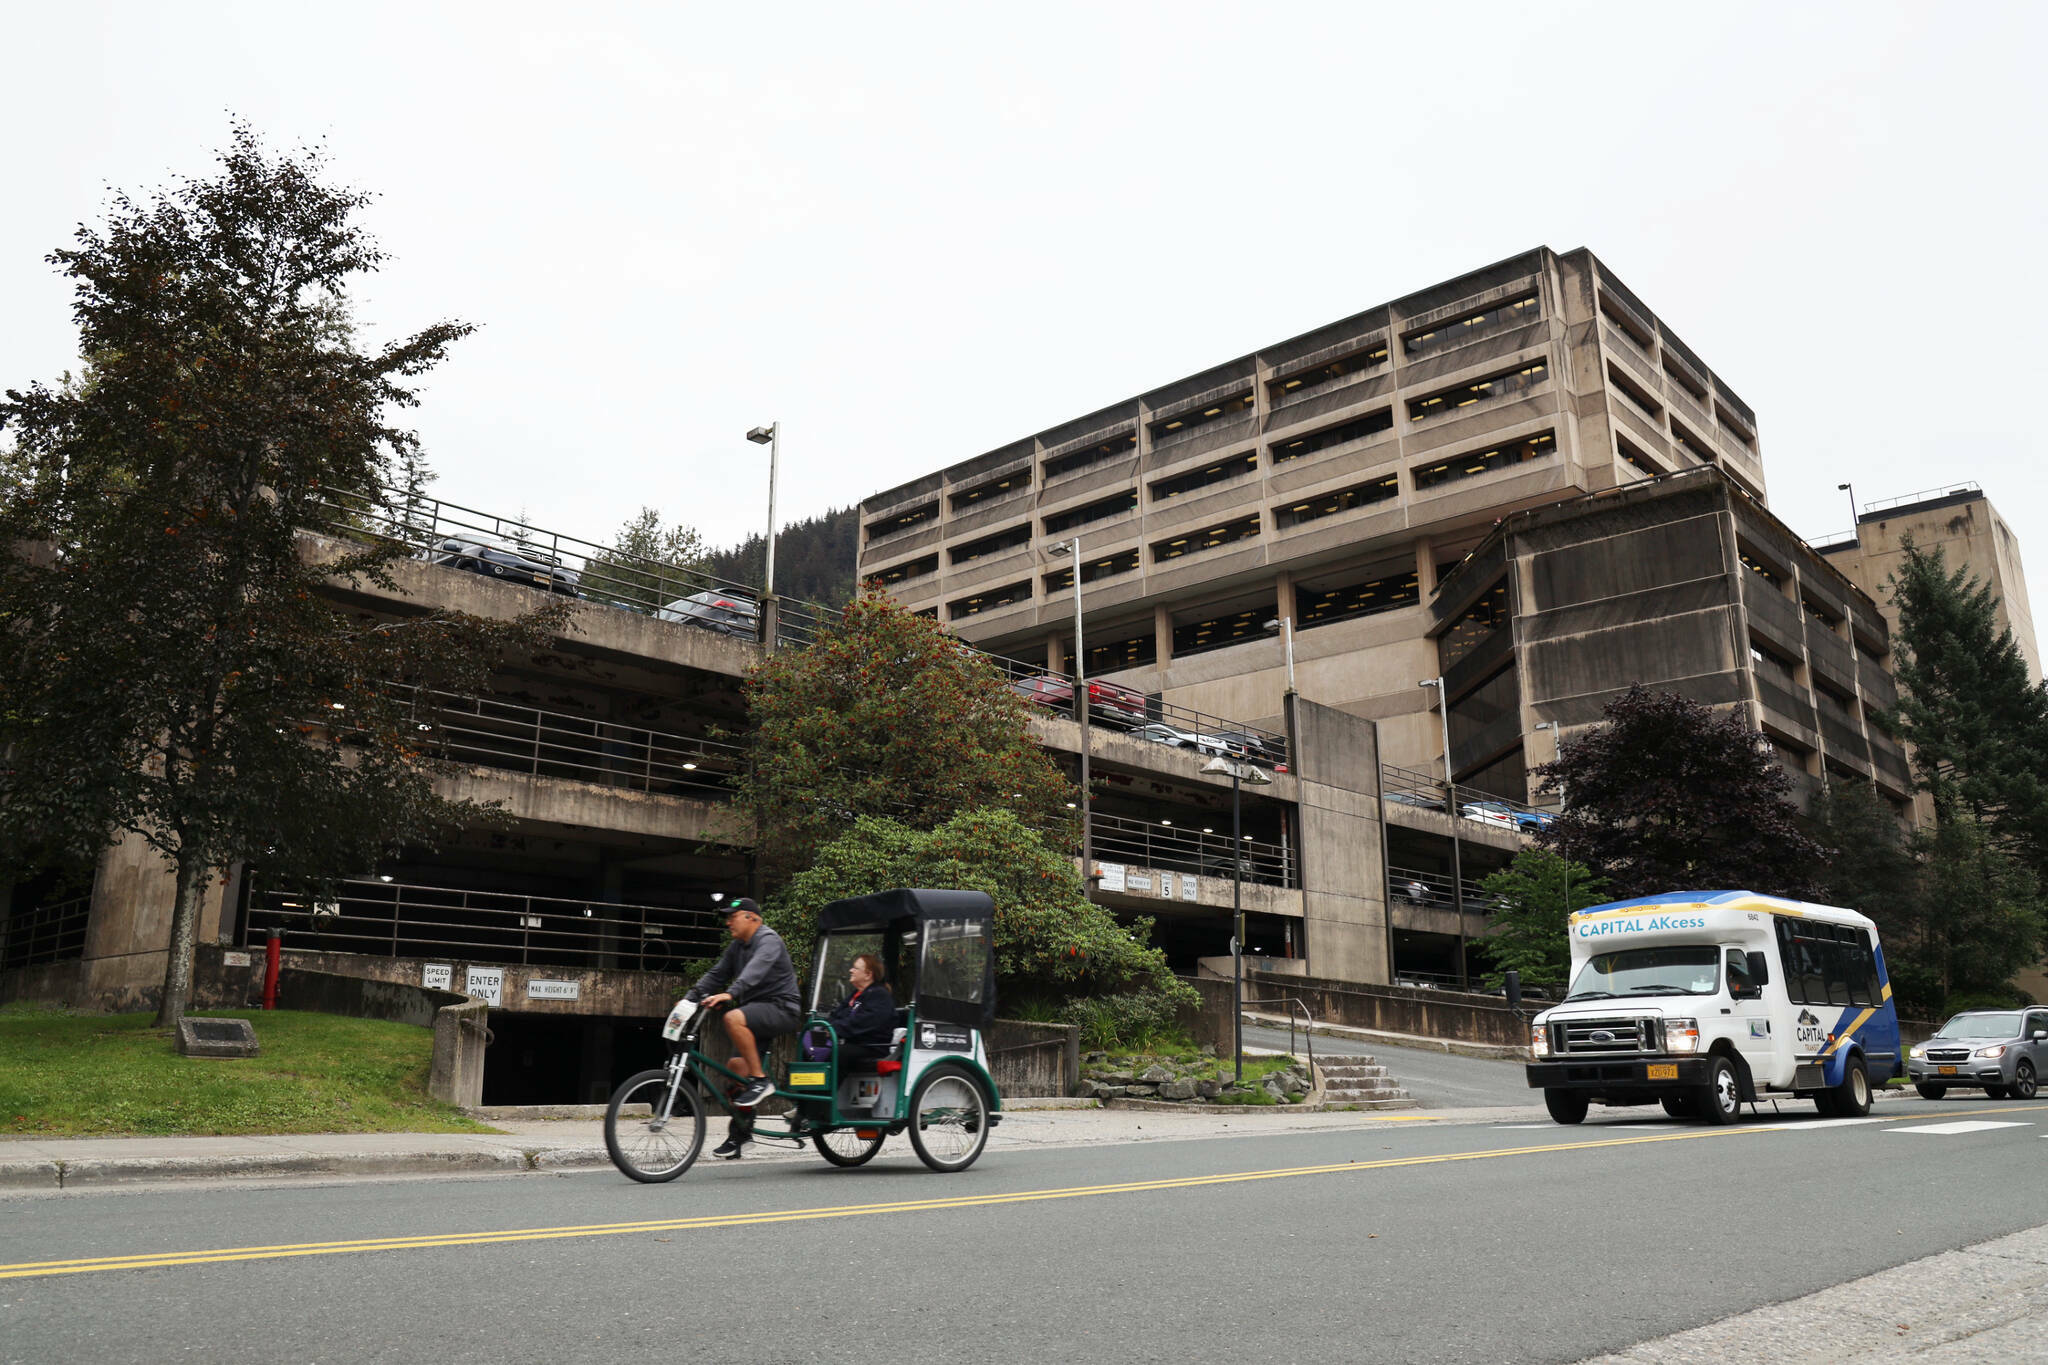 A cycle rickshaw passes the State Office Building in September of 2022. (Clarise Larson / Juneau Empire File)